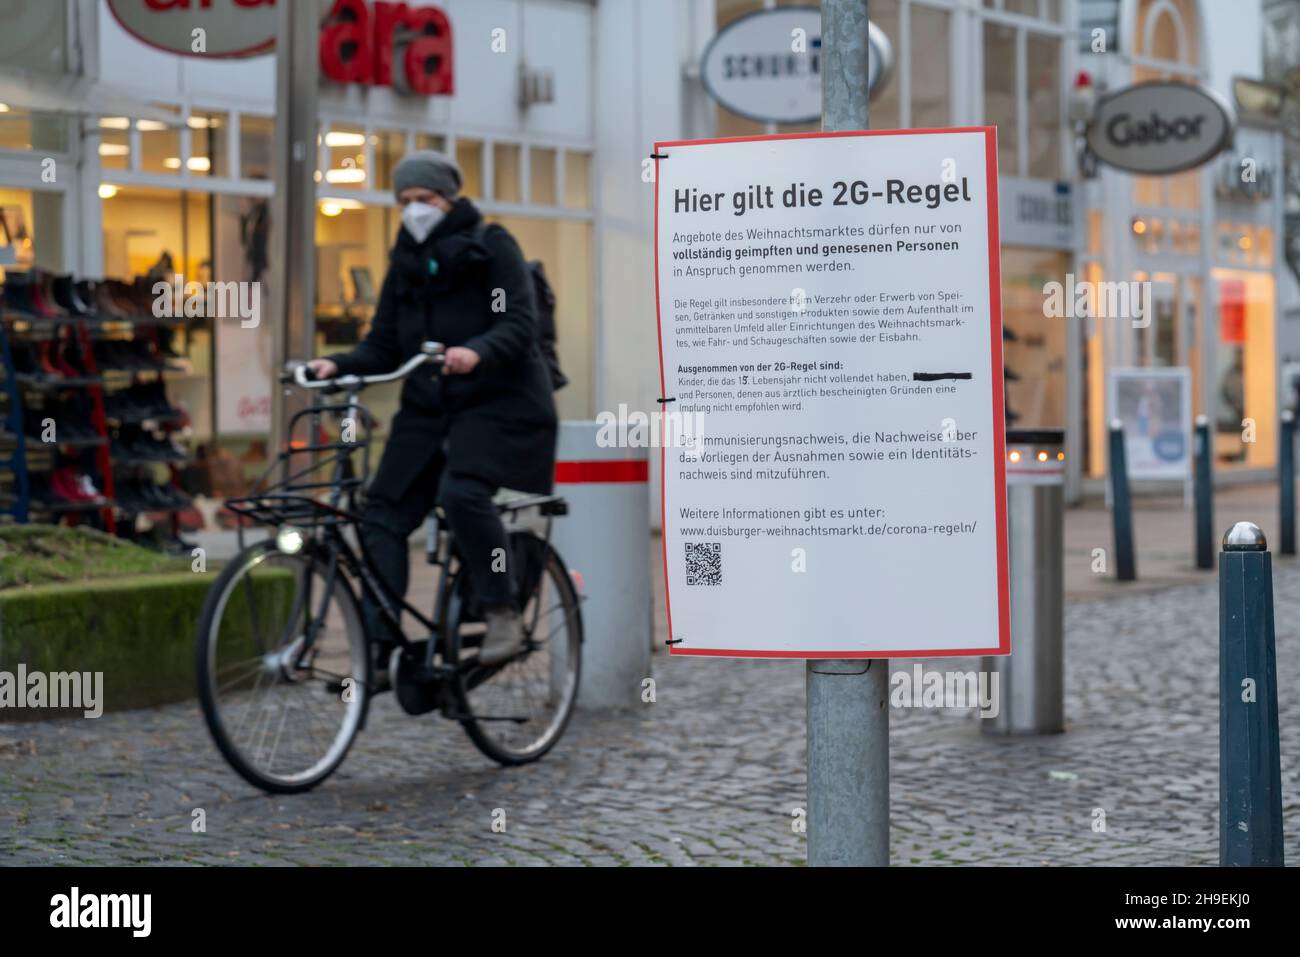 Christmas market in the city, Königsstrasse, during the fourth Corona wave, 2G regulation, signs, in Duisburg, NRW, Germany, Stock Photo